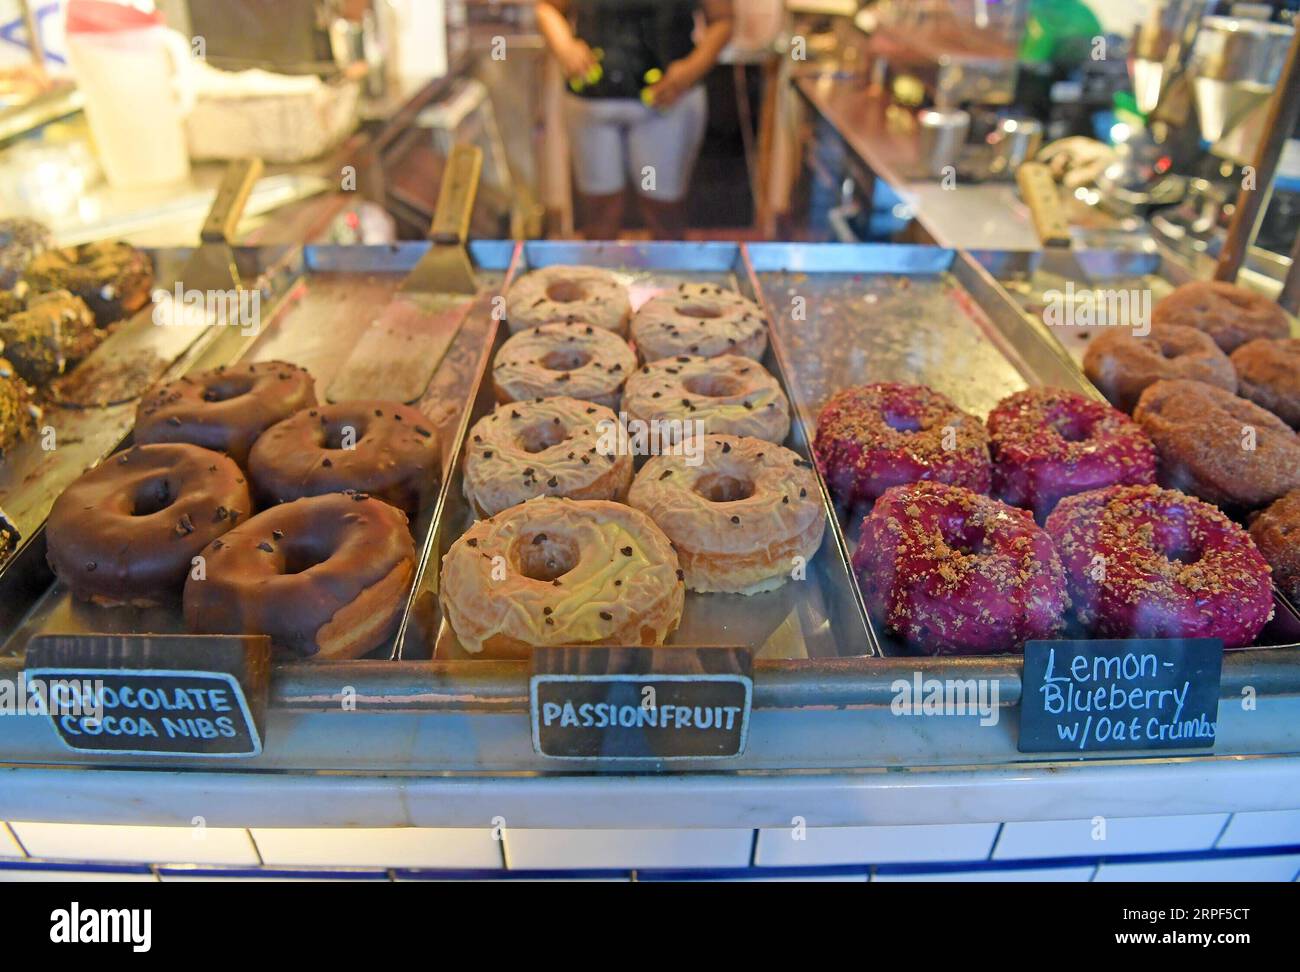 (190913) -- NEW YORK, Sept. 13, 2019 -- Photo taken on Sept. 12, 2019 shows donuts of different flavors at a donut store in New York, the United States. Donut is a circular cake which is fried in hot fat, sometimes with a hole in the middle. As a representative American dessert, donut can be easily bought at any pastry shop or snack bar, and even National Doughnut Day has been created to express Americans appreciation towards donut. ) U.S.-NEW YORK-DESSERT-DONUT LixRui PUBLICATIONxNOTxINxCHN Stock Photo